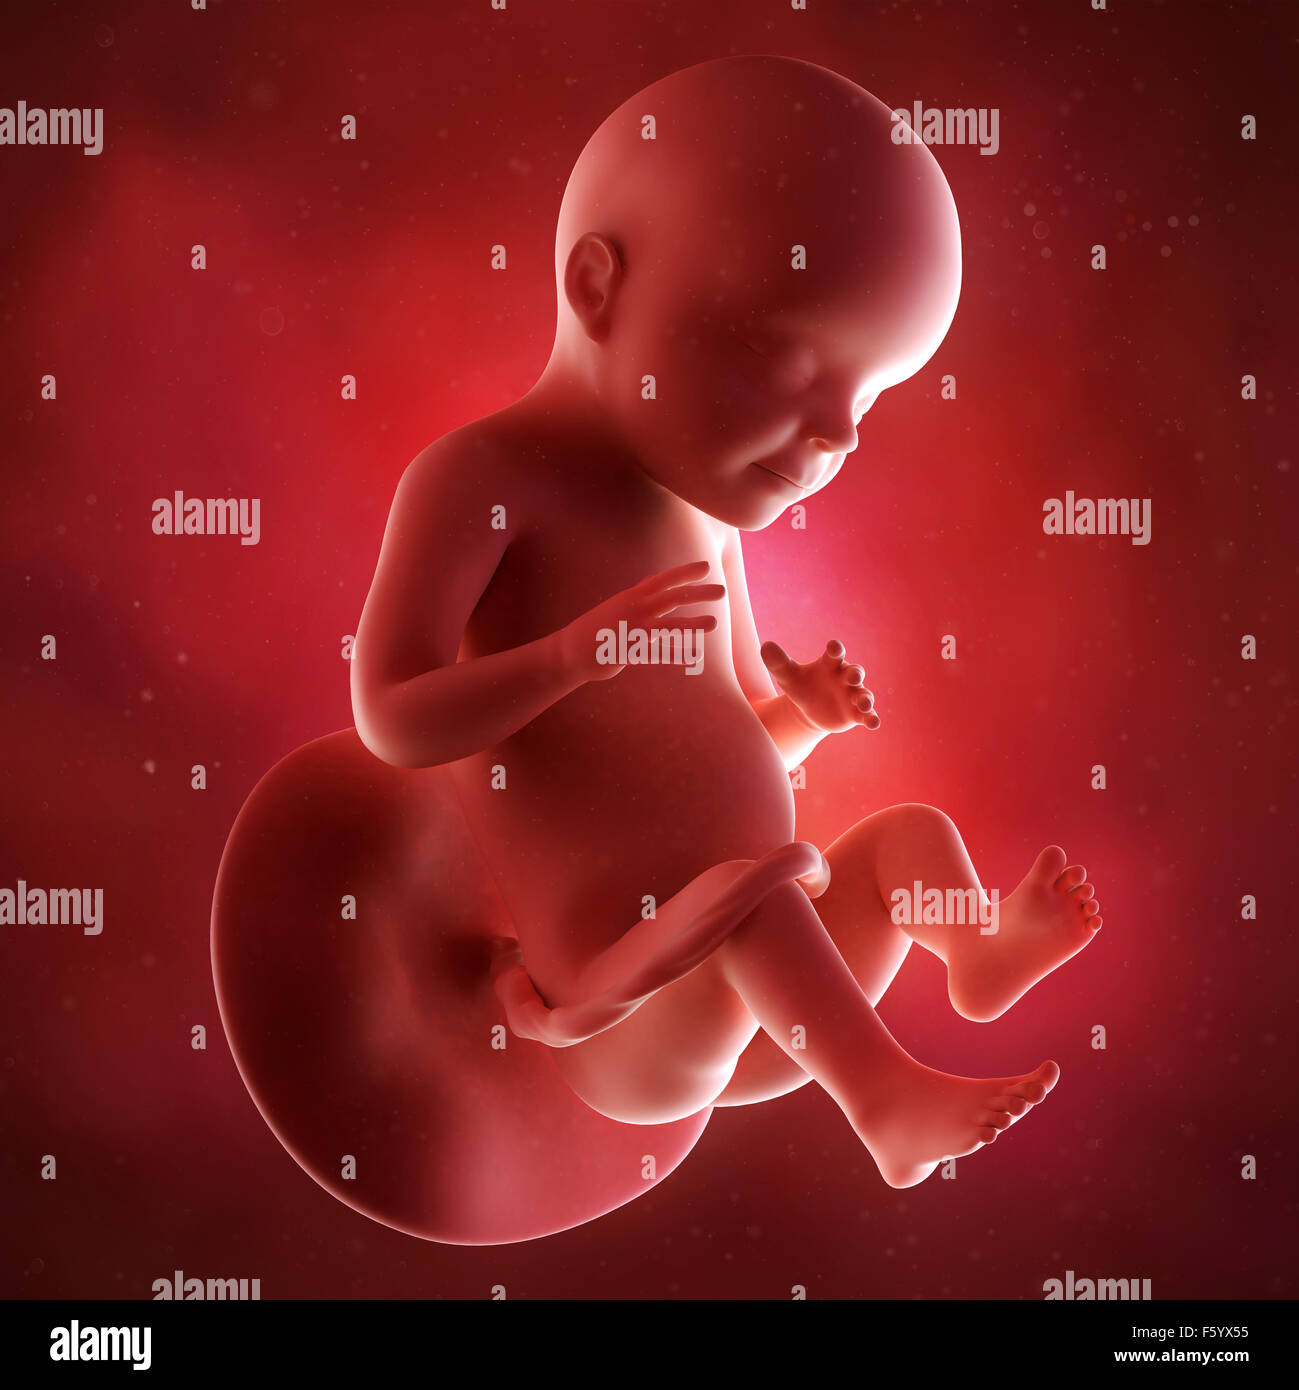 medical accurate 3d illustration of a fetus week 28 Stock Photo